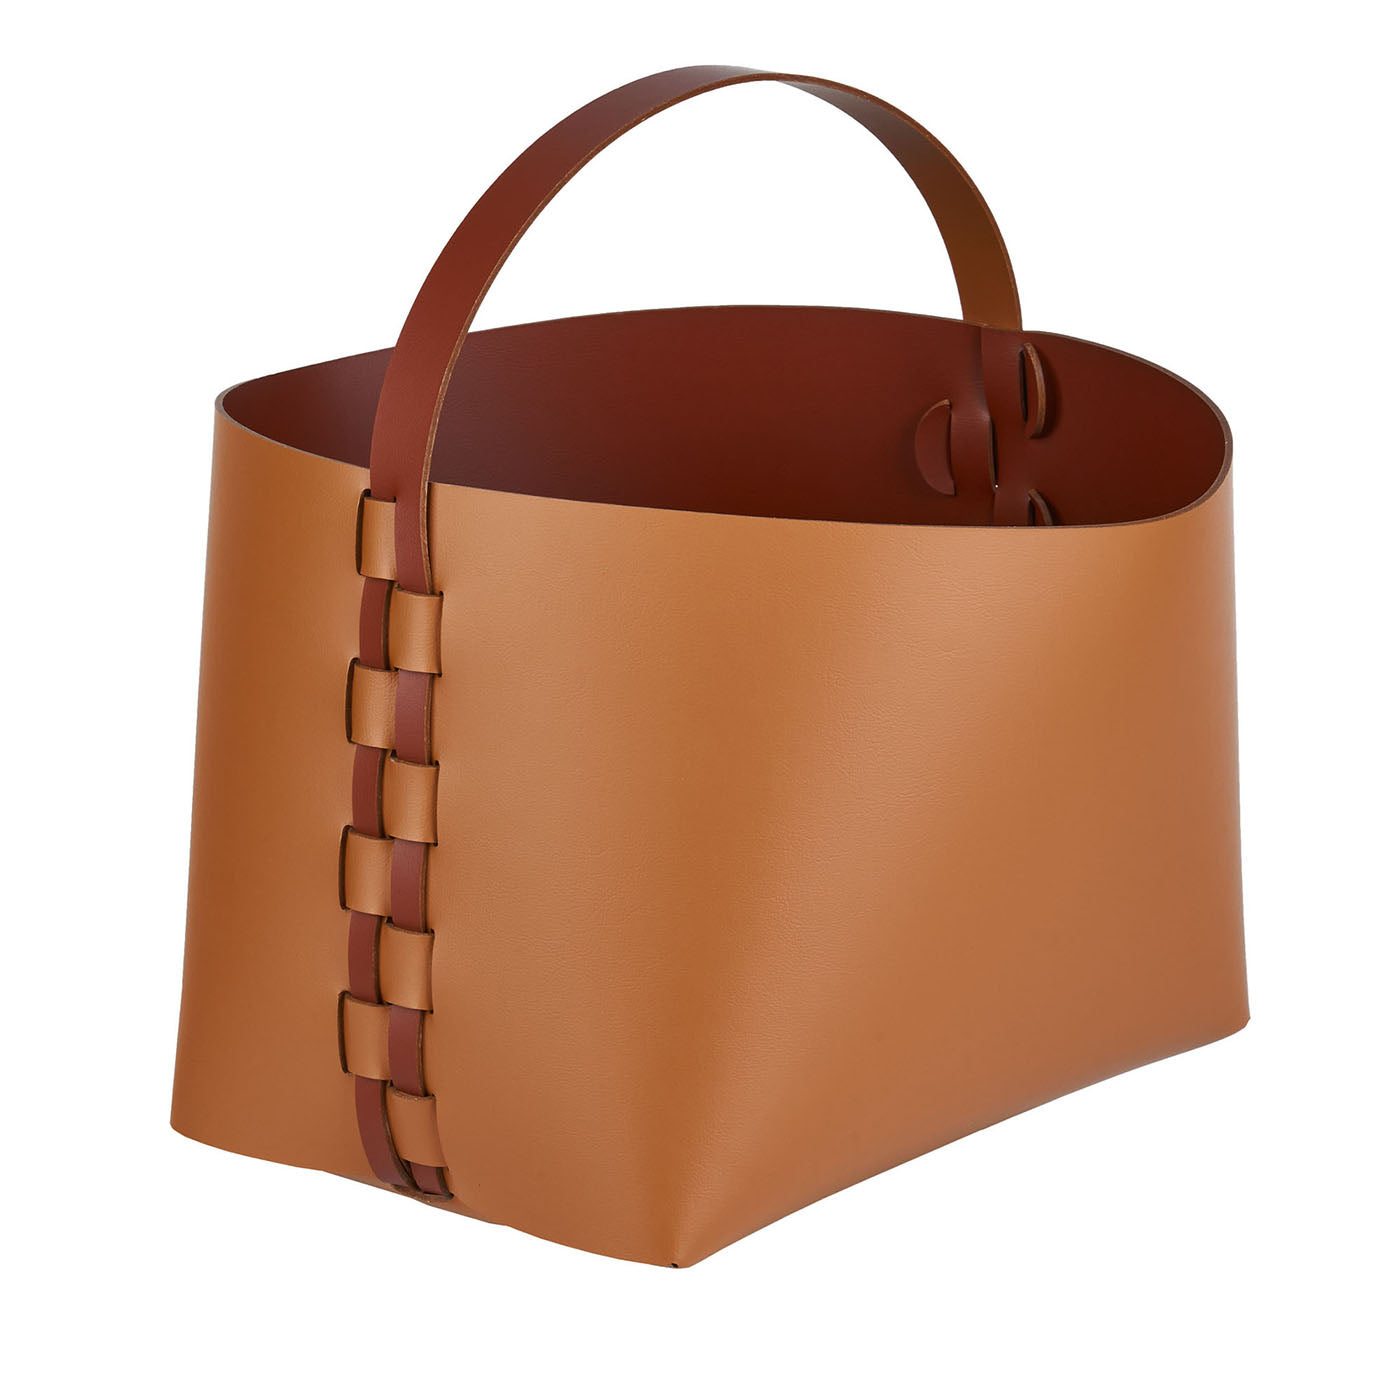 Helena Small Cognac and Bordeaux Leather Basket - Main view